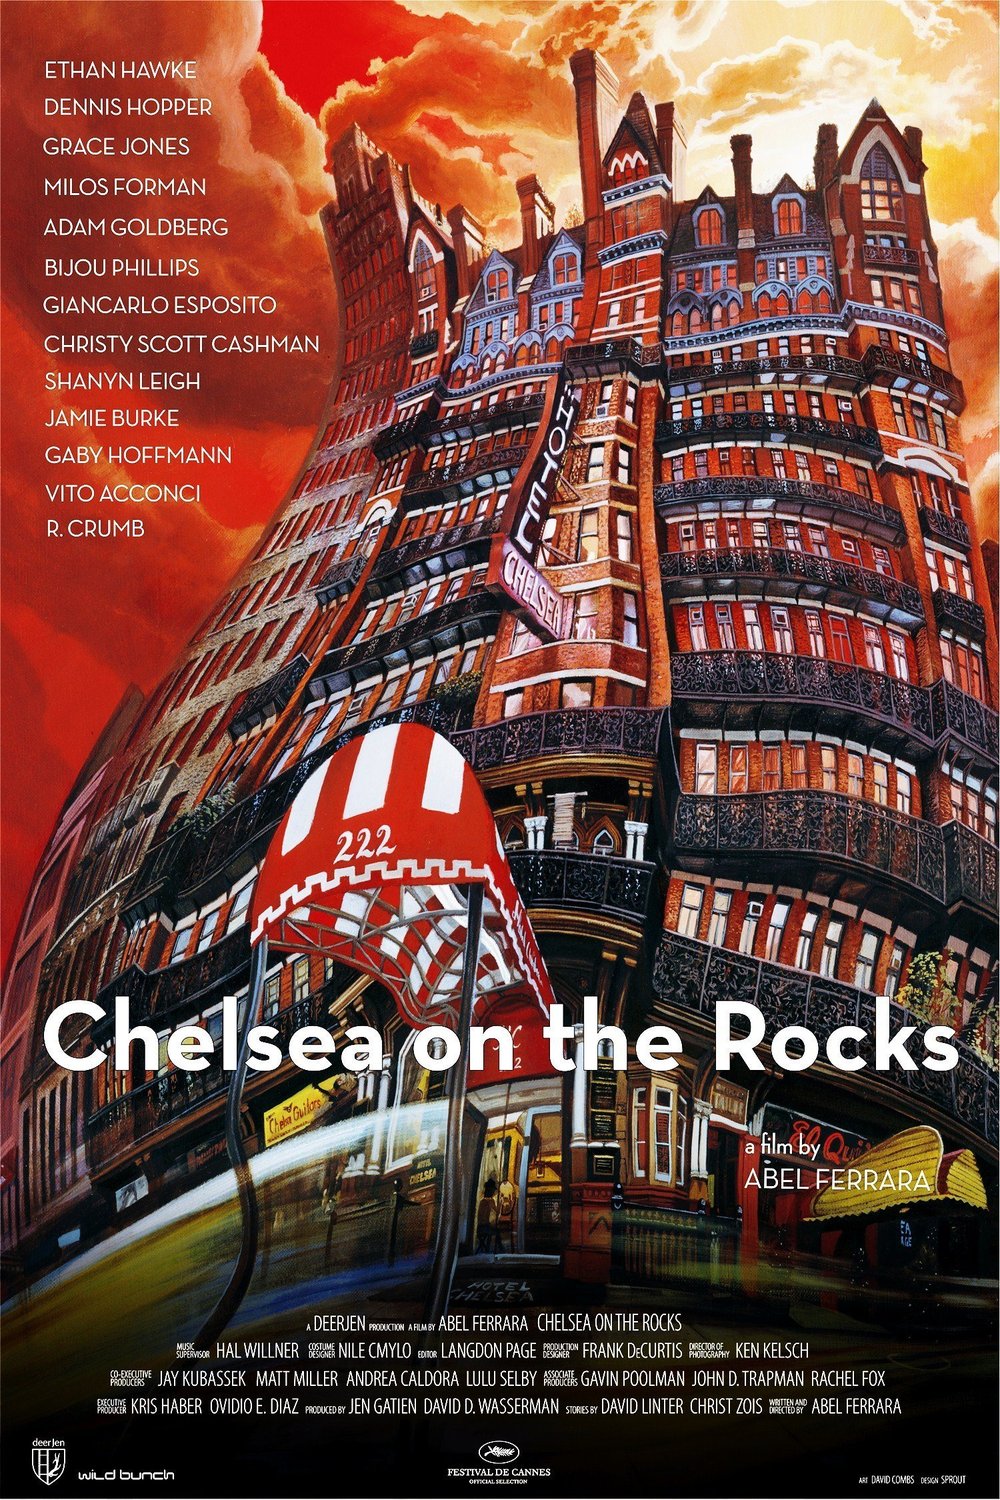 Poster of the movie Chelsea on the Rocks